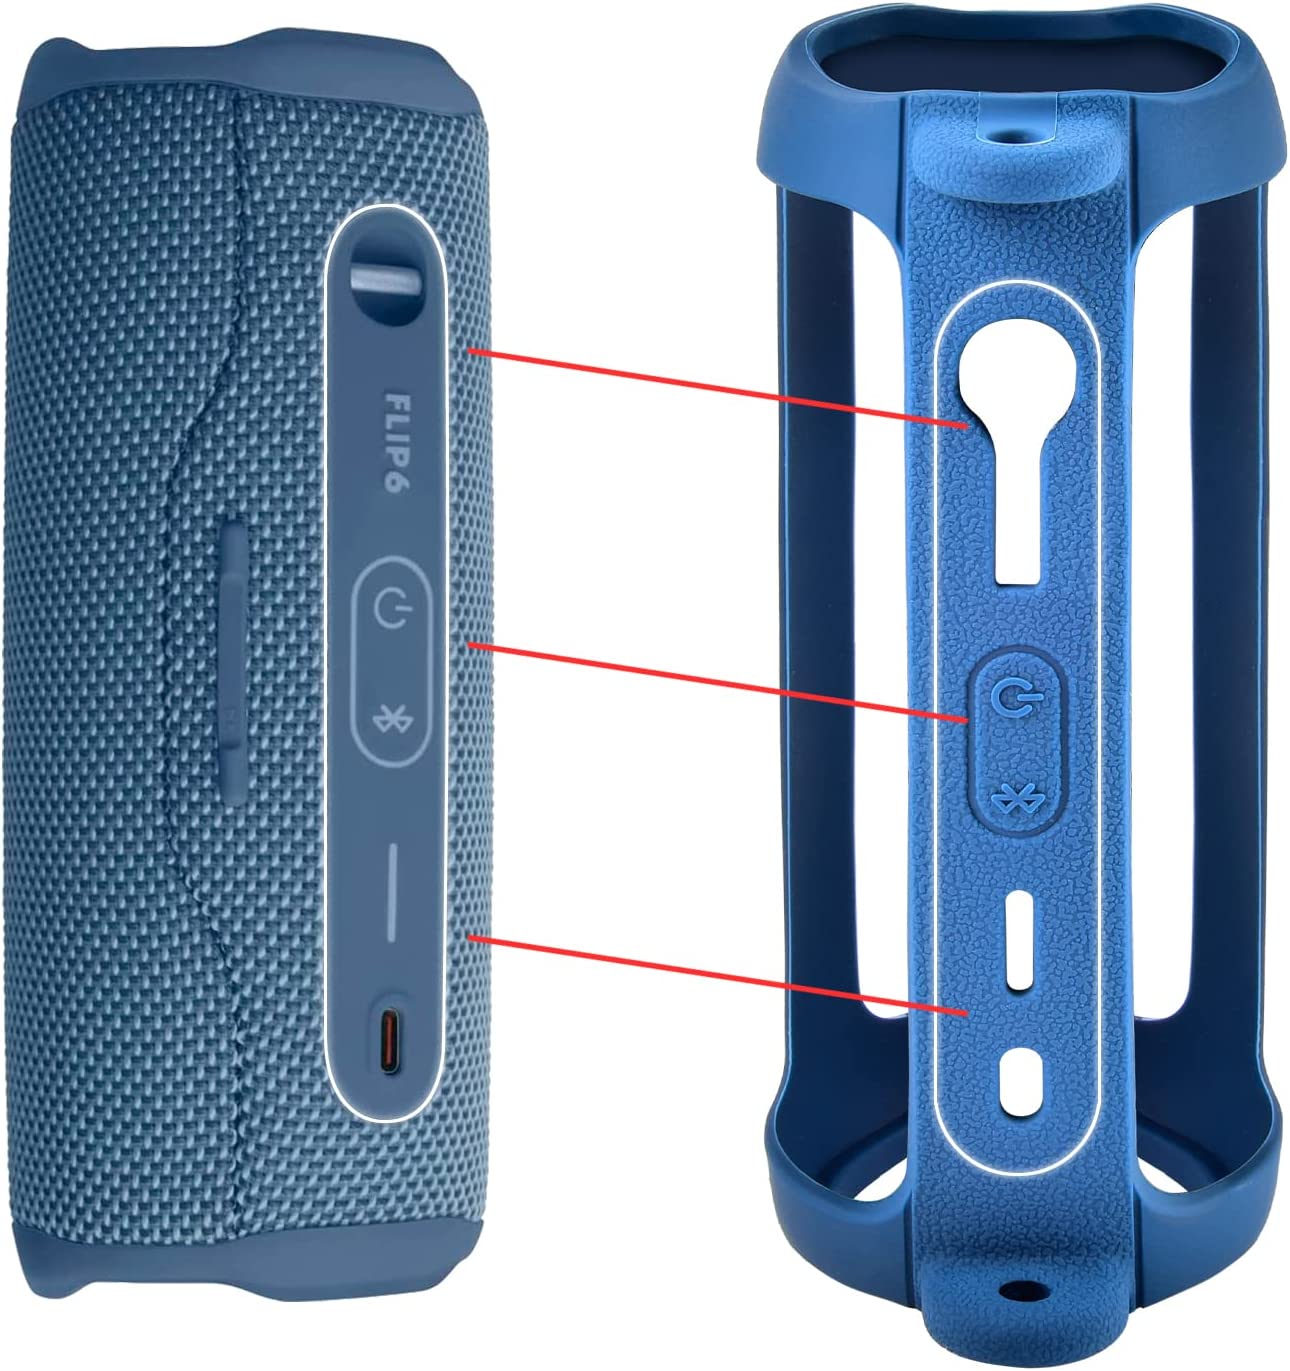 Silicone Case Compatible with JBL Flip 6 Portable Bluetooth Speaker, Gel Soft Skin Cover Waterproof Rubber Case Travel Carry Pouch with Strap (Speaker and Accessories not Included) Blue